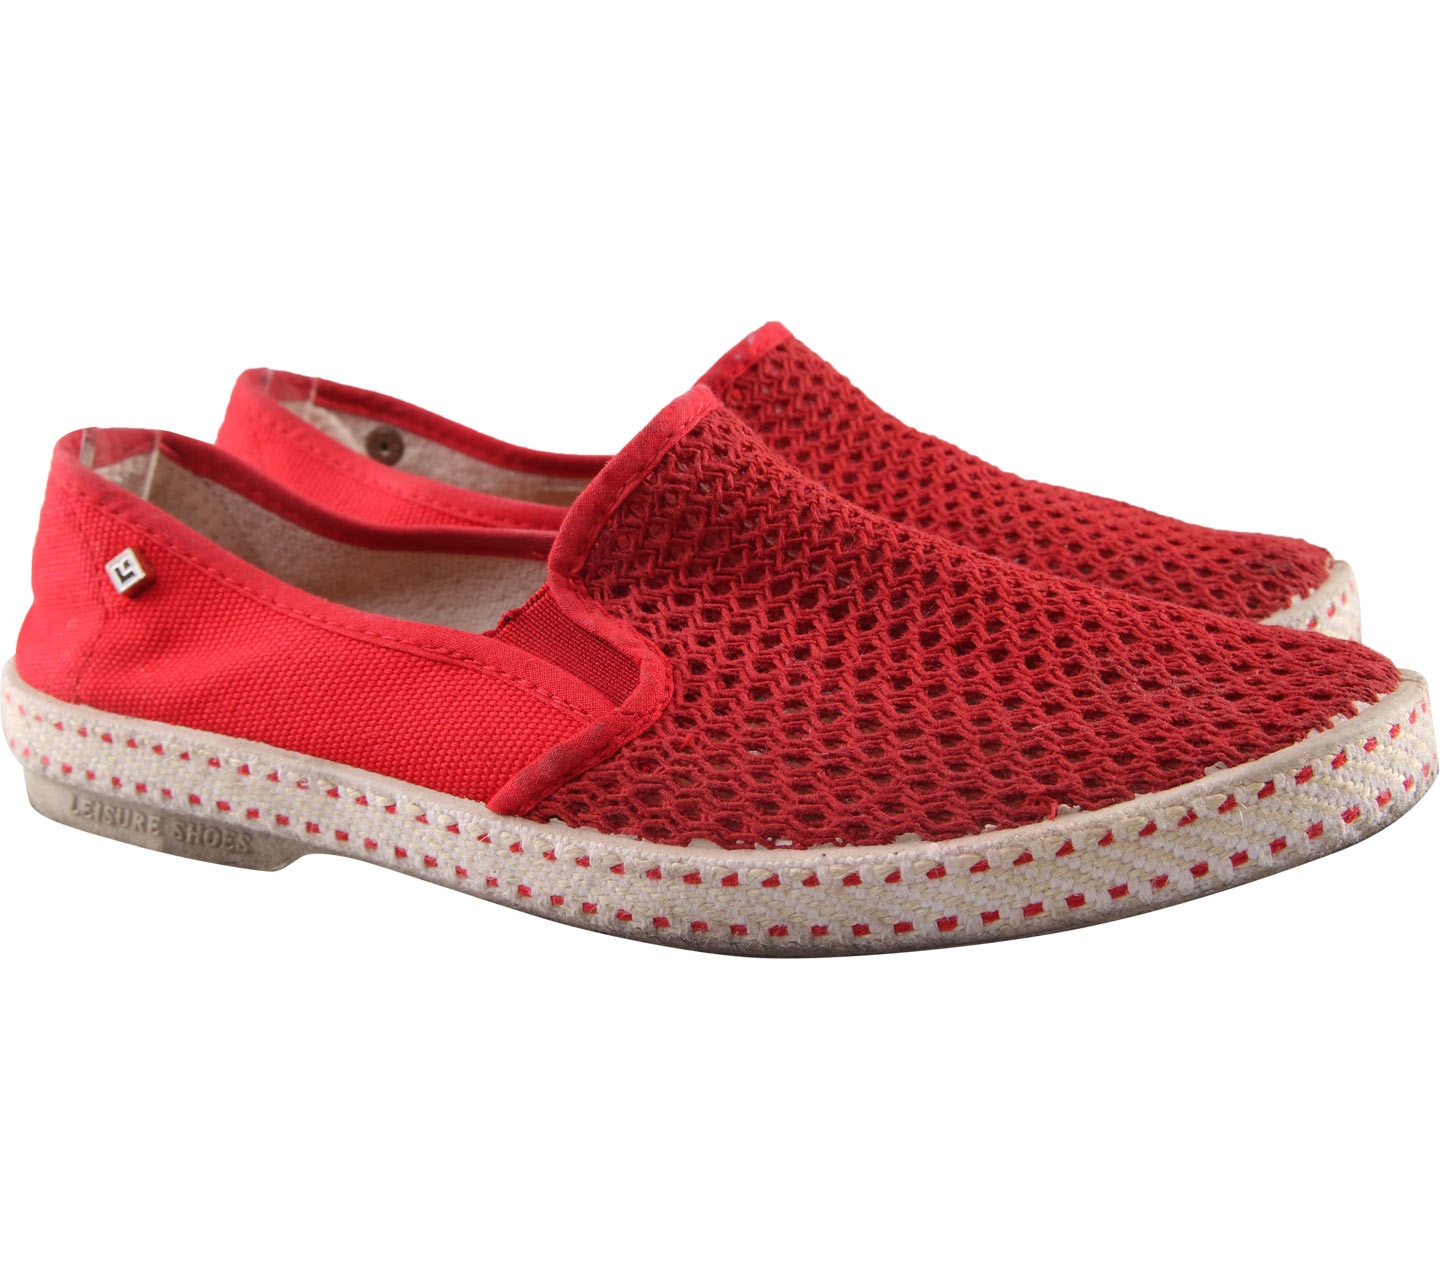 Rivieras Red Leisure Shoes Flats